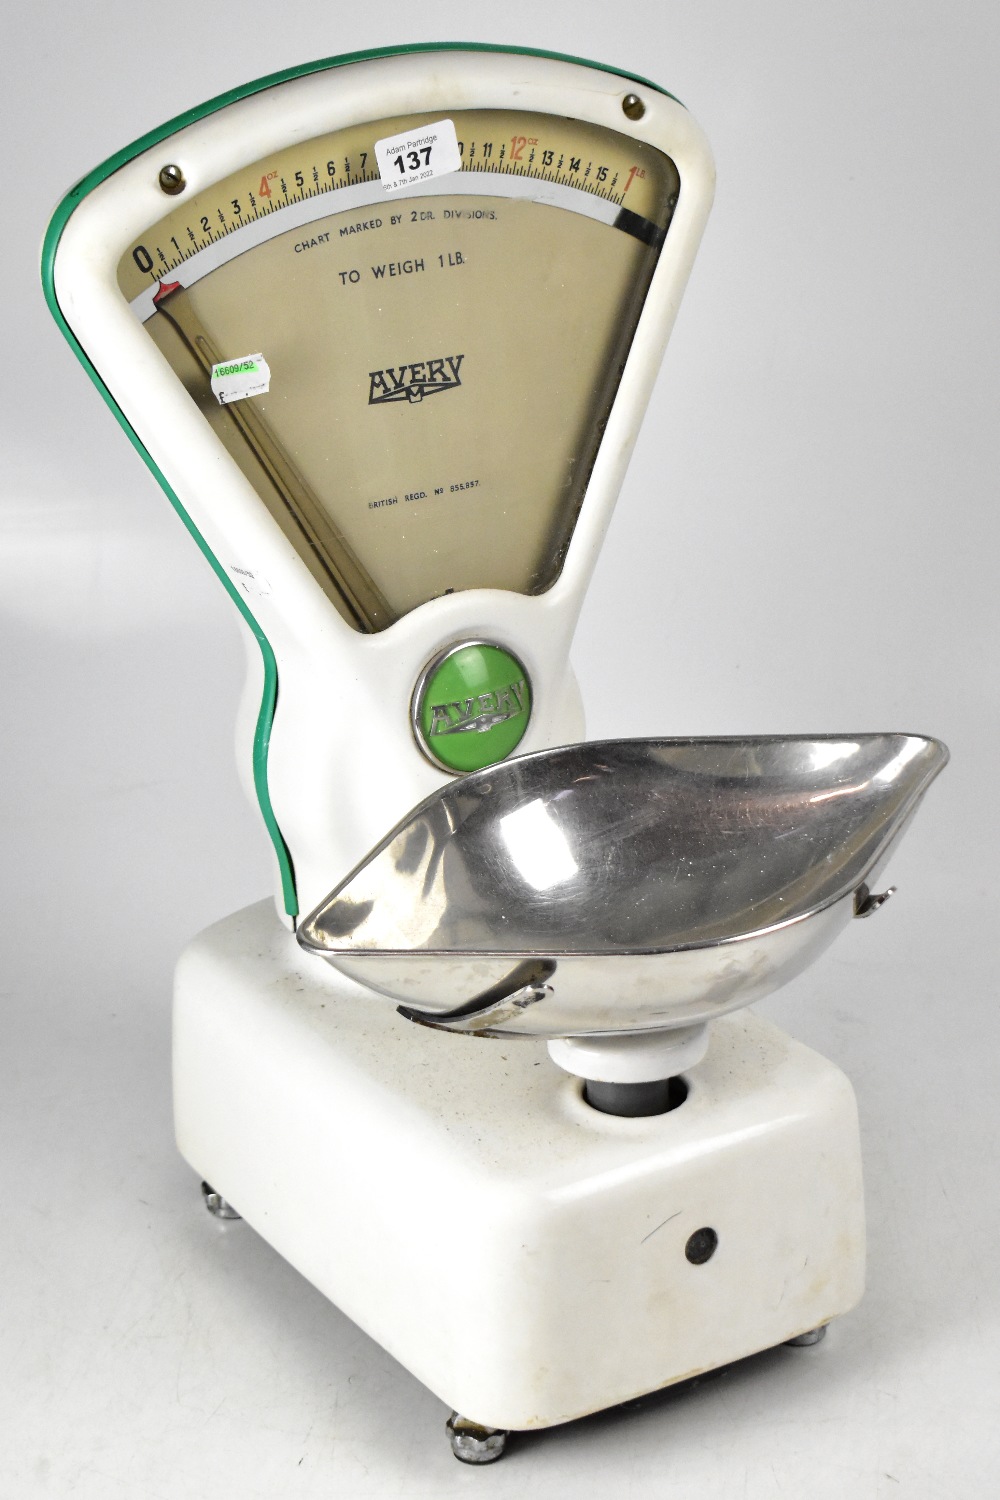 AVERY; a vintage enamelled set of shop scales with detachable bowl, British Registered Design No.